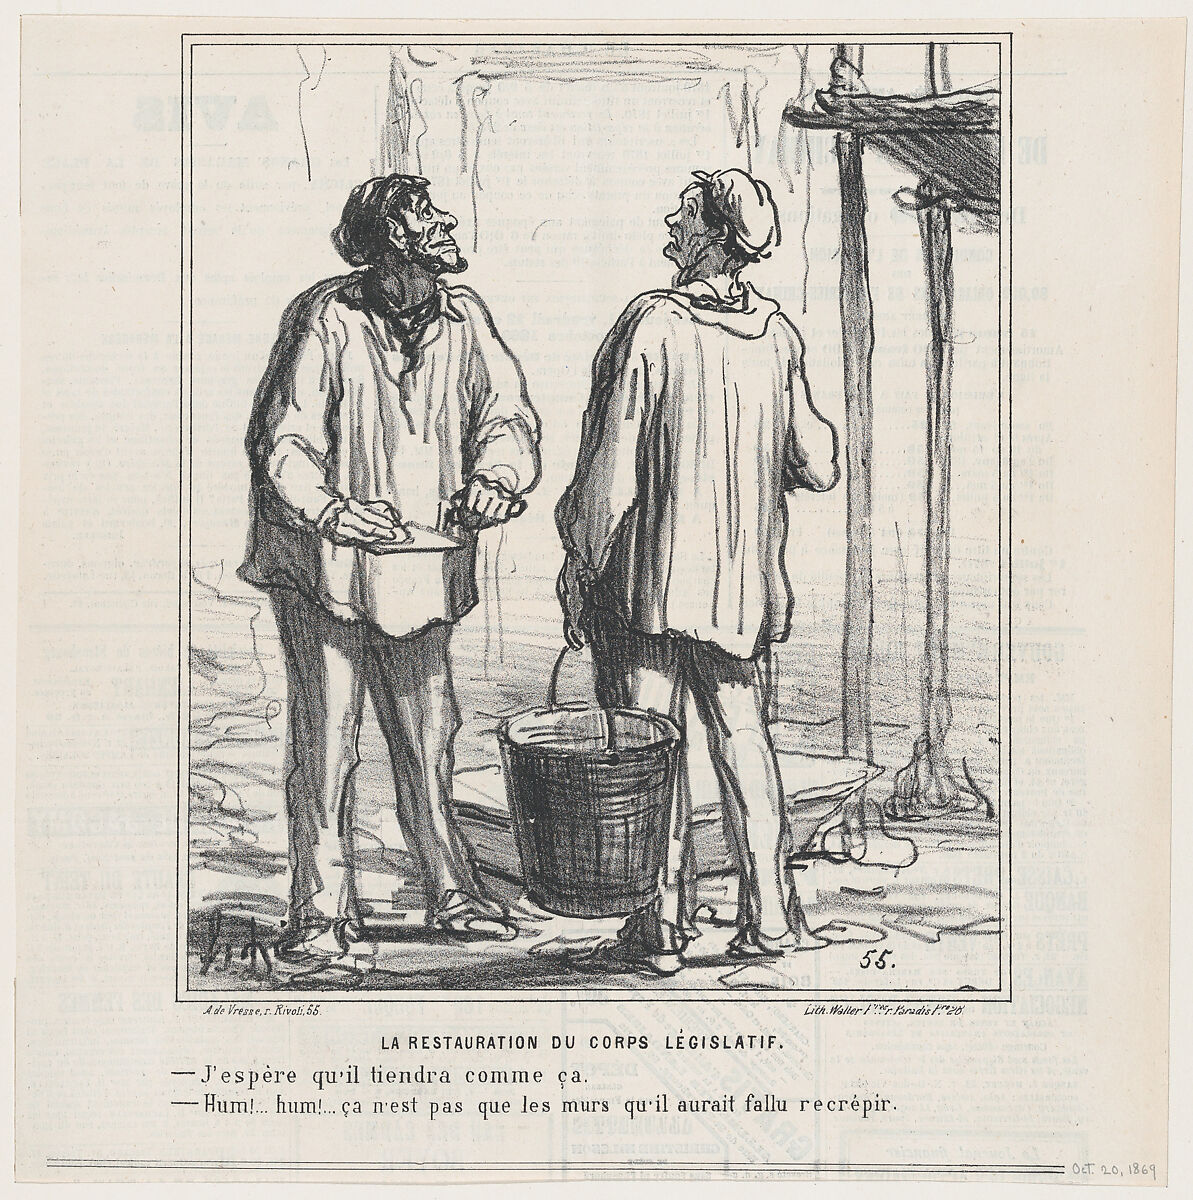 The restoration of the legislative body: –Hope that it will hold like this. –Hum... hummm! Maybe it wasn't enough to just re-plaster the walls., from 'News of the day,' published in Le Charivari, October 20, 1869, Honoré Daumier (French, Marseilles 1808–1879 Valmondois), Lithograph on newsprint; third state of three (Delteil) 